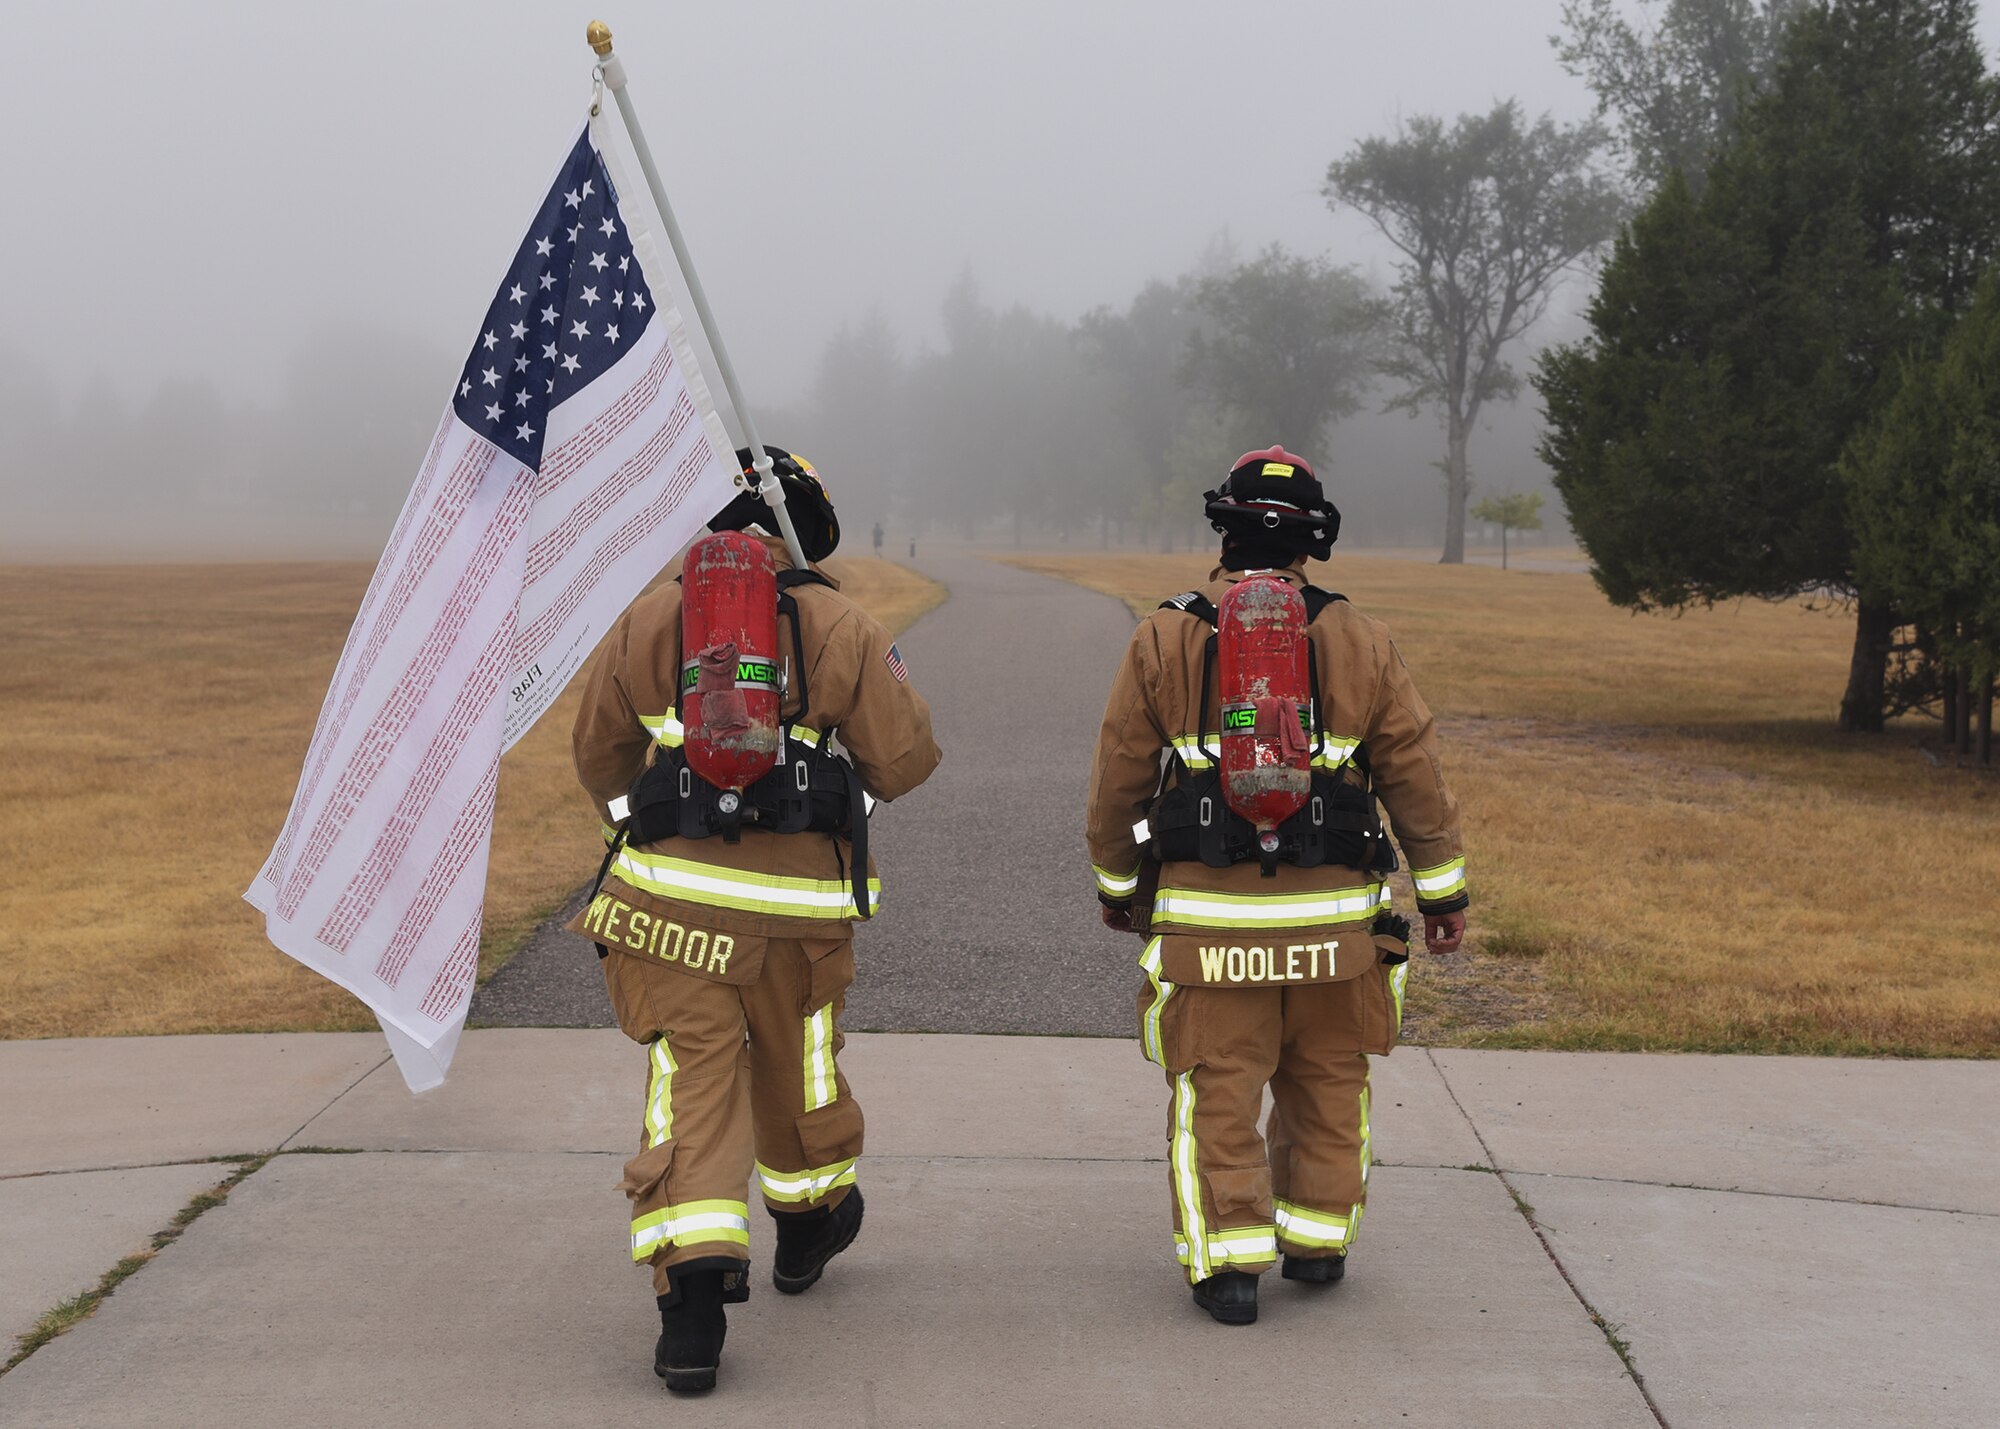 Senior Airman Ralph Mesidor and Cody Woolett, members of the Warren Fire Department, carry the Flag of Heroes around the base parade field Sept. 11 on F. E. Warren Air Force Base. Firefighters conducted the 24 hour vigil in firefighter gear honoring those who were killed in the attacks of Sept. 11, 2001.